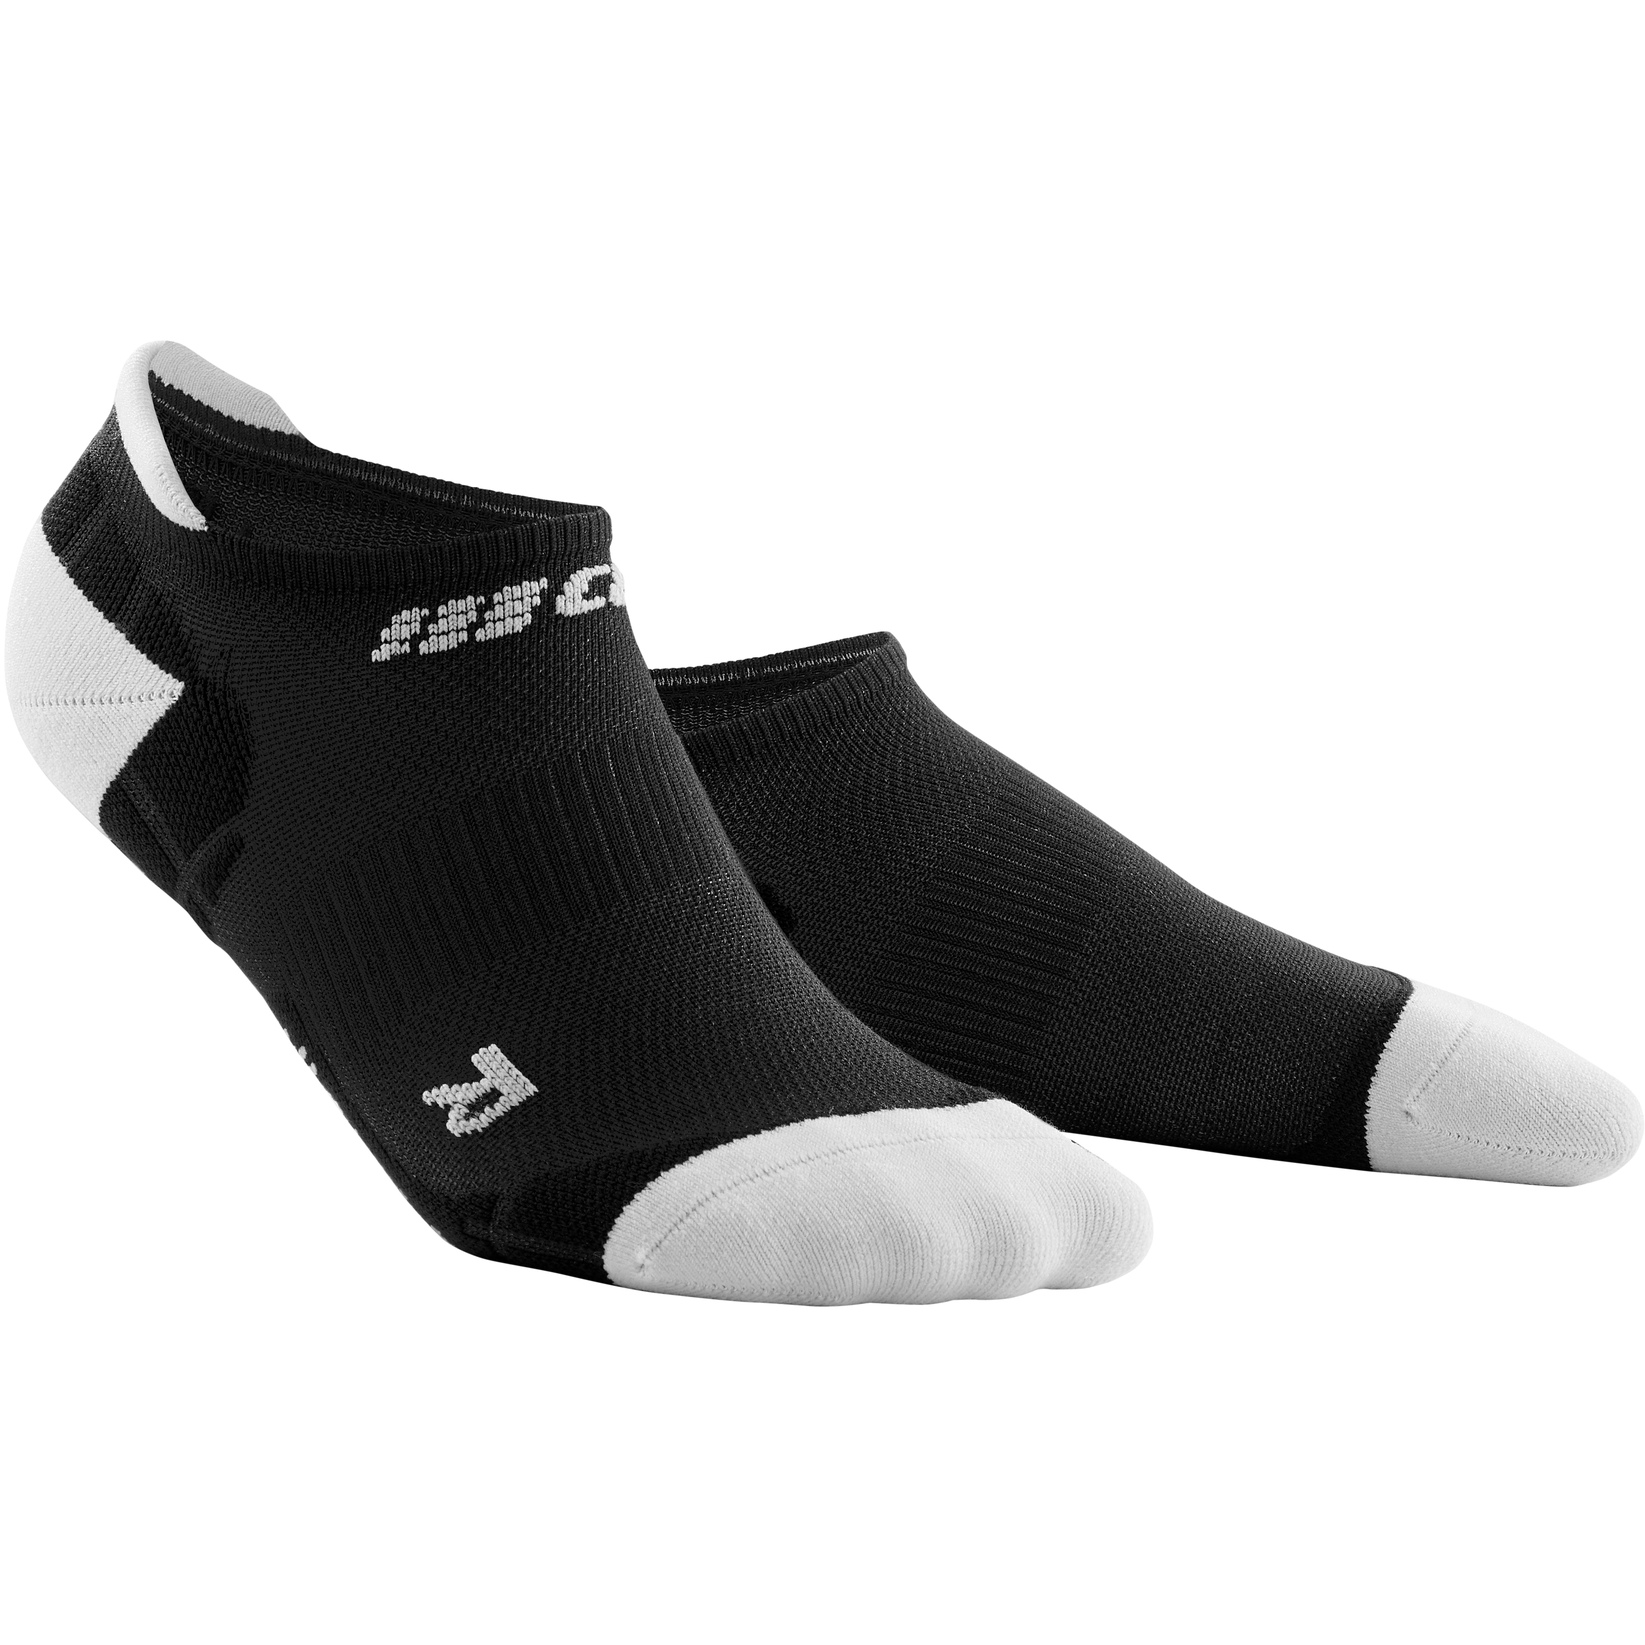 Picture of CEP Ultralight No Show Compression Socks - black/light grey